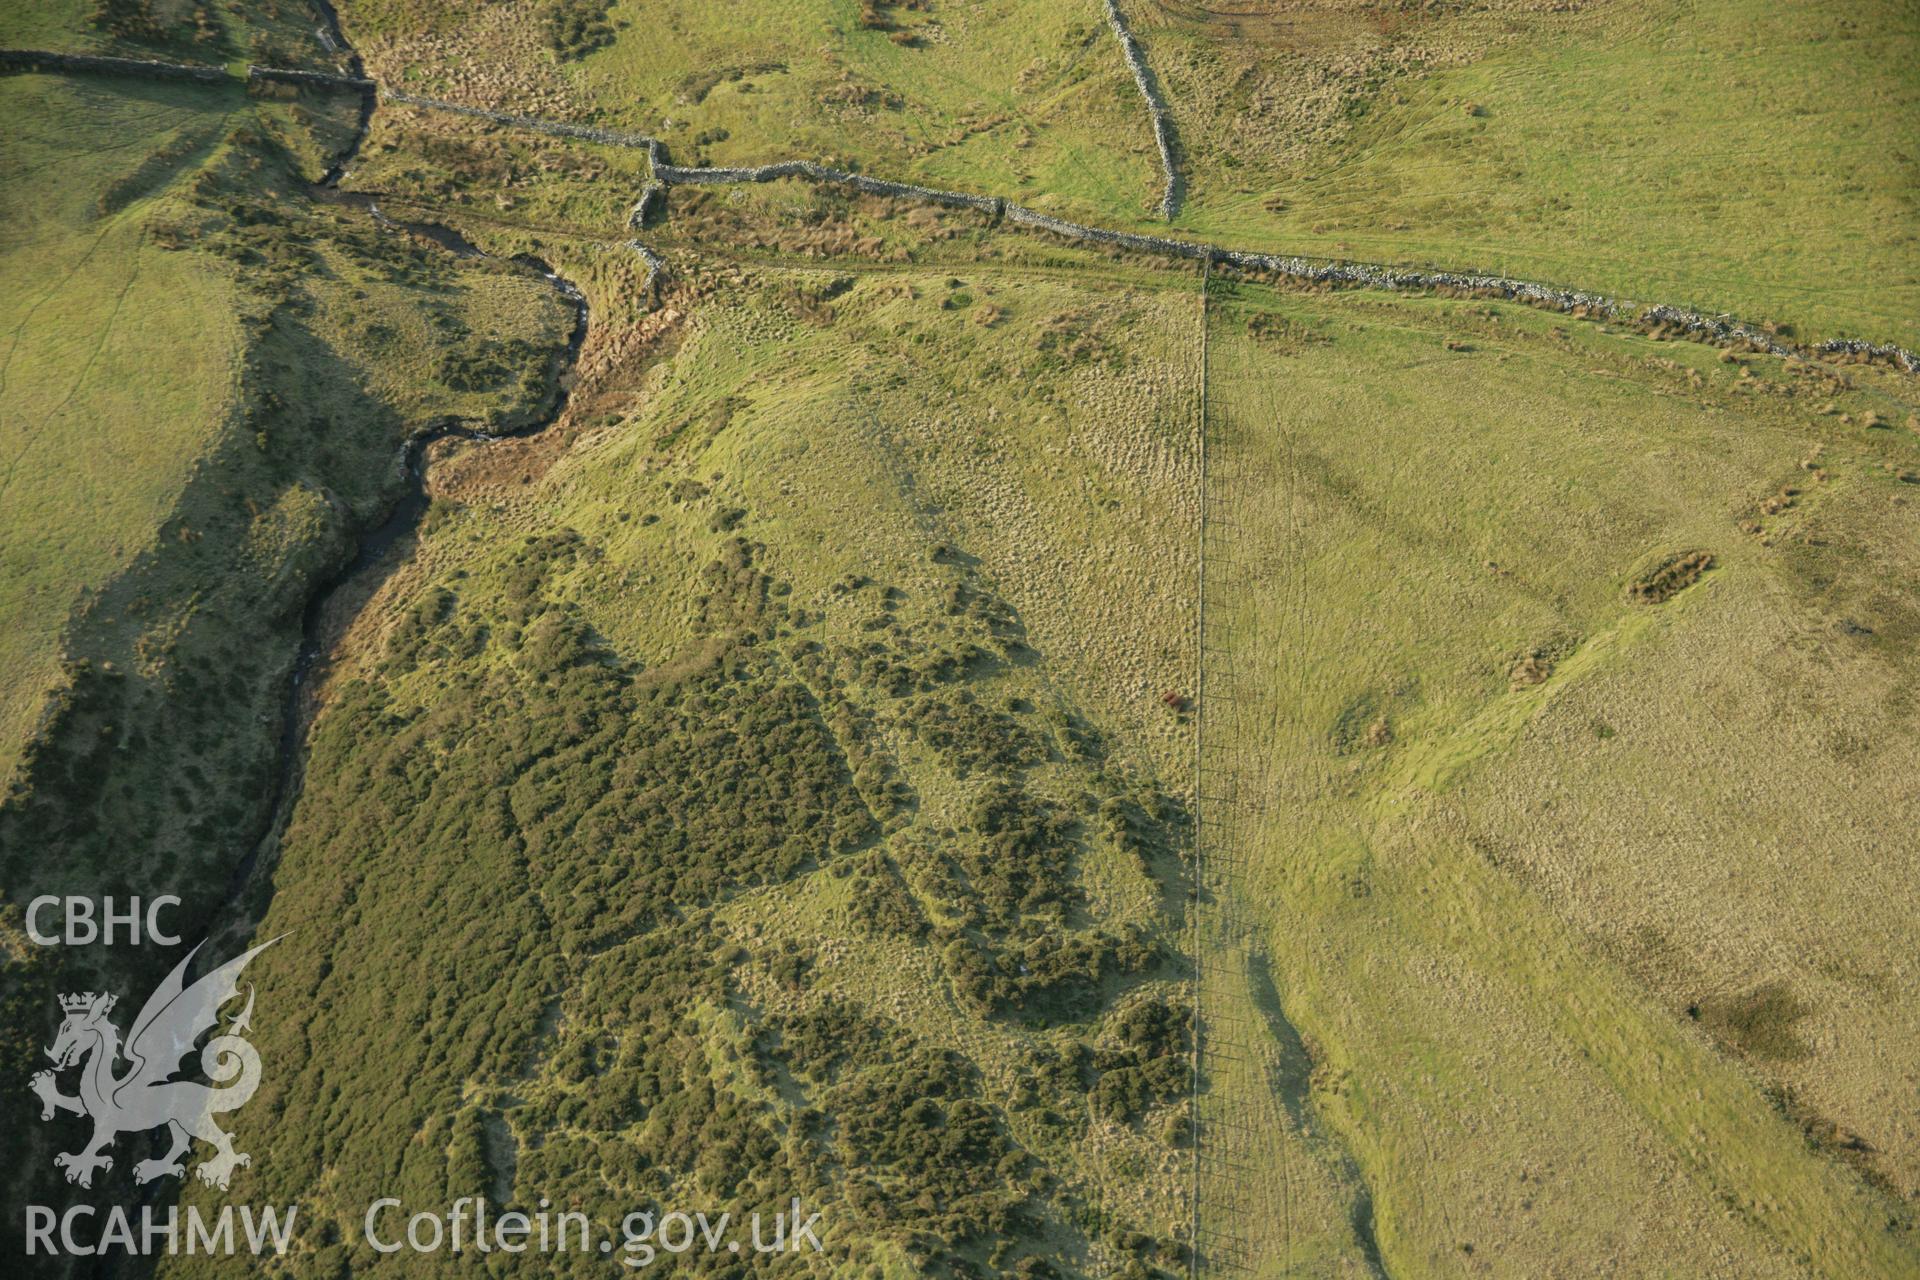 RCAHMW colour oblique aerial photograph of Tomen y Mur Roman Military Settlement. Taken on 25 January 2007 by Toby Driver